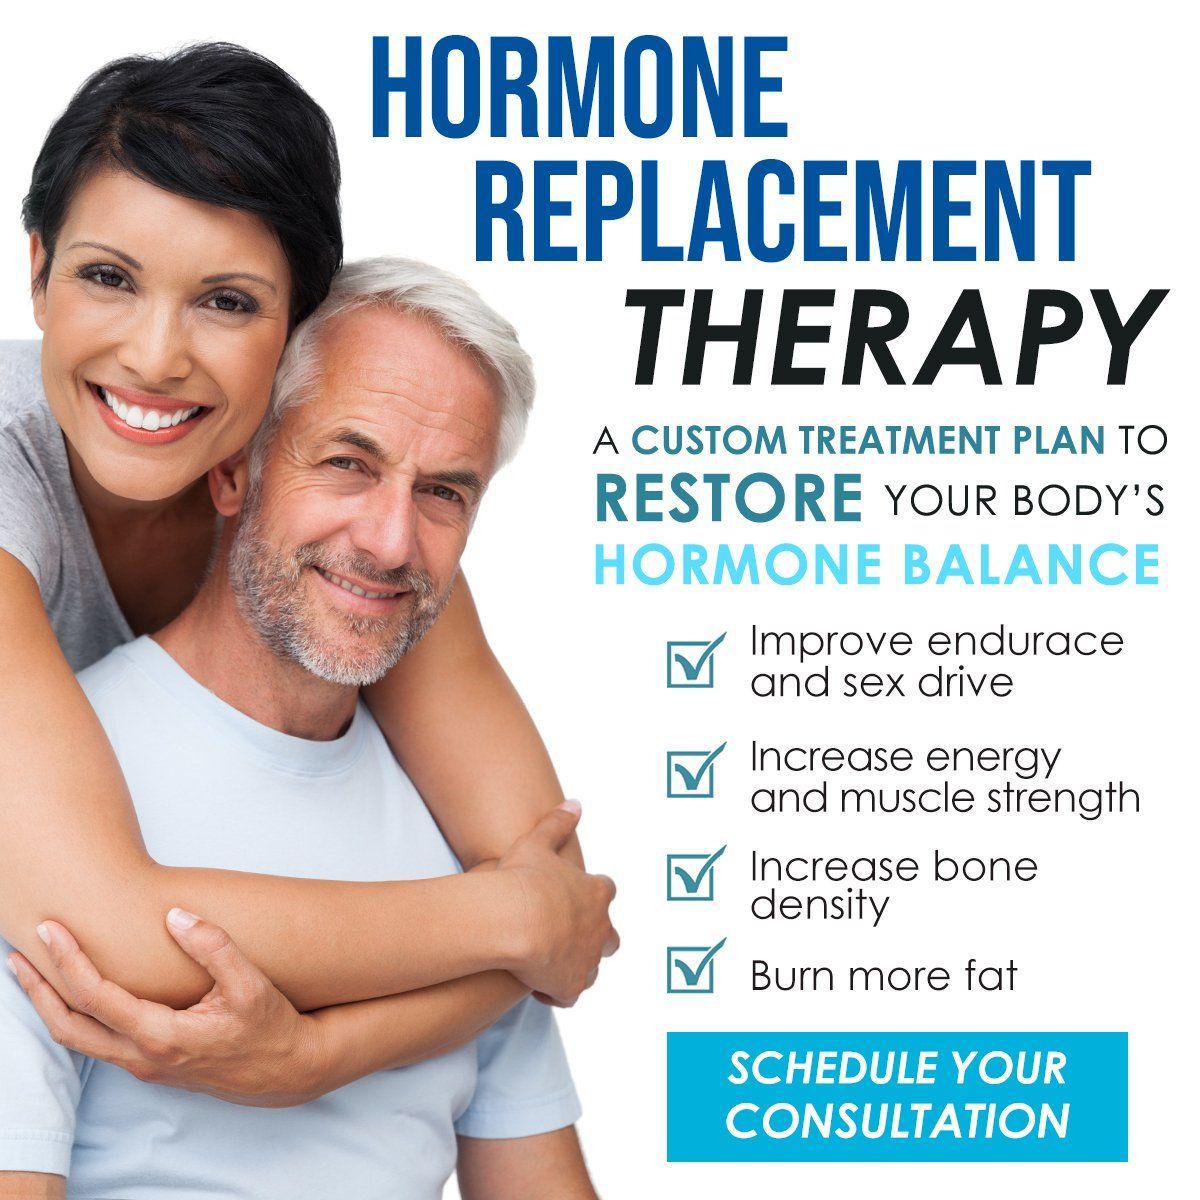 hormone replacement therapy, a custom treatment plan to restore your body's hormone balance. improve endurace and sex drive, increase energy and muscle strength, increase bone density, burn more fat, and more. schedule your consultation.